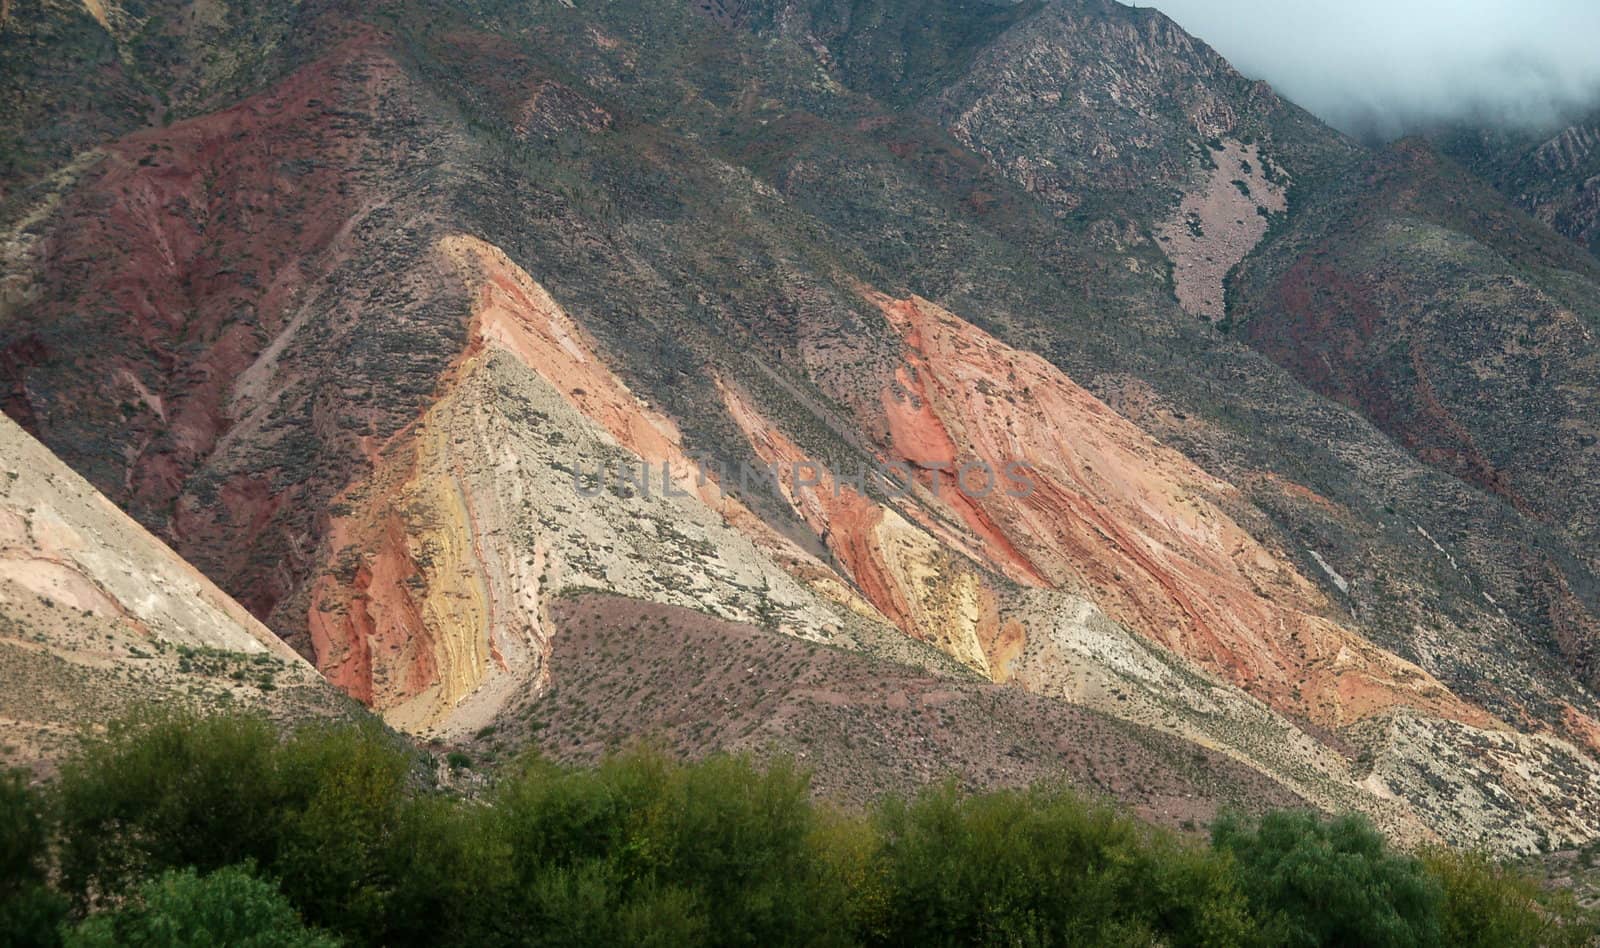 Colourful scenery in North East Argentina